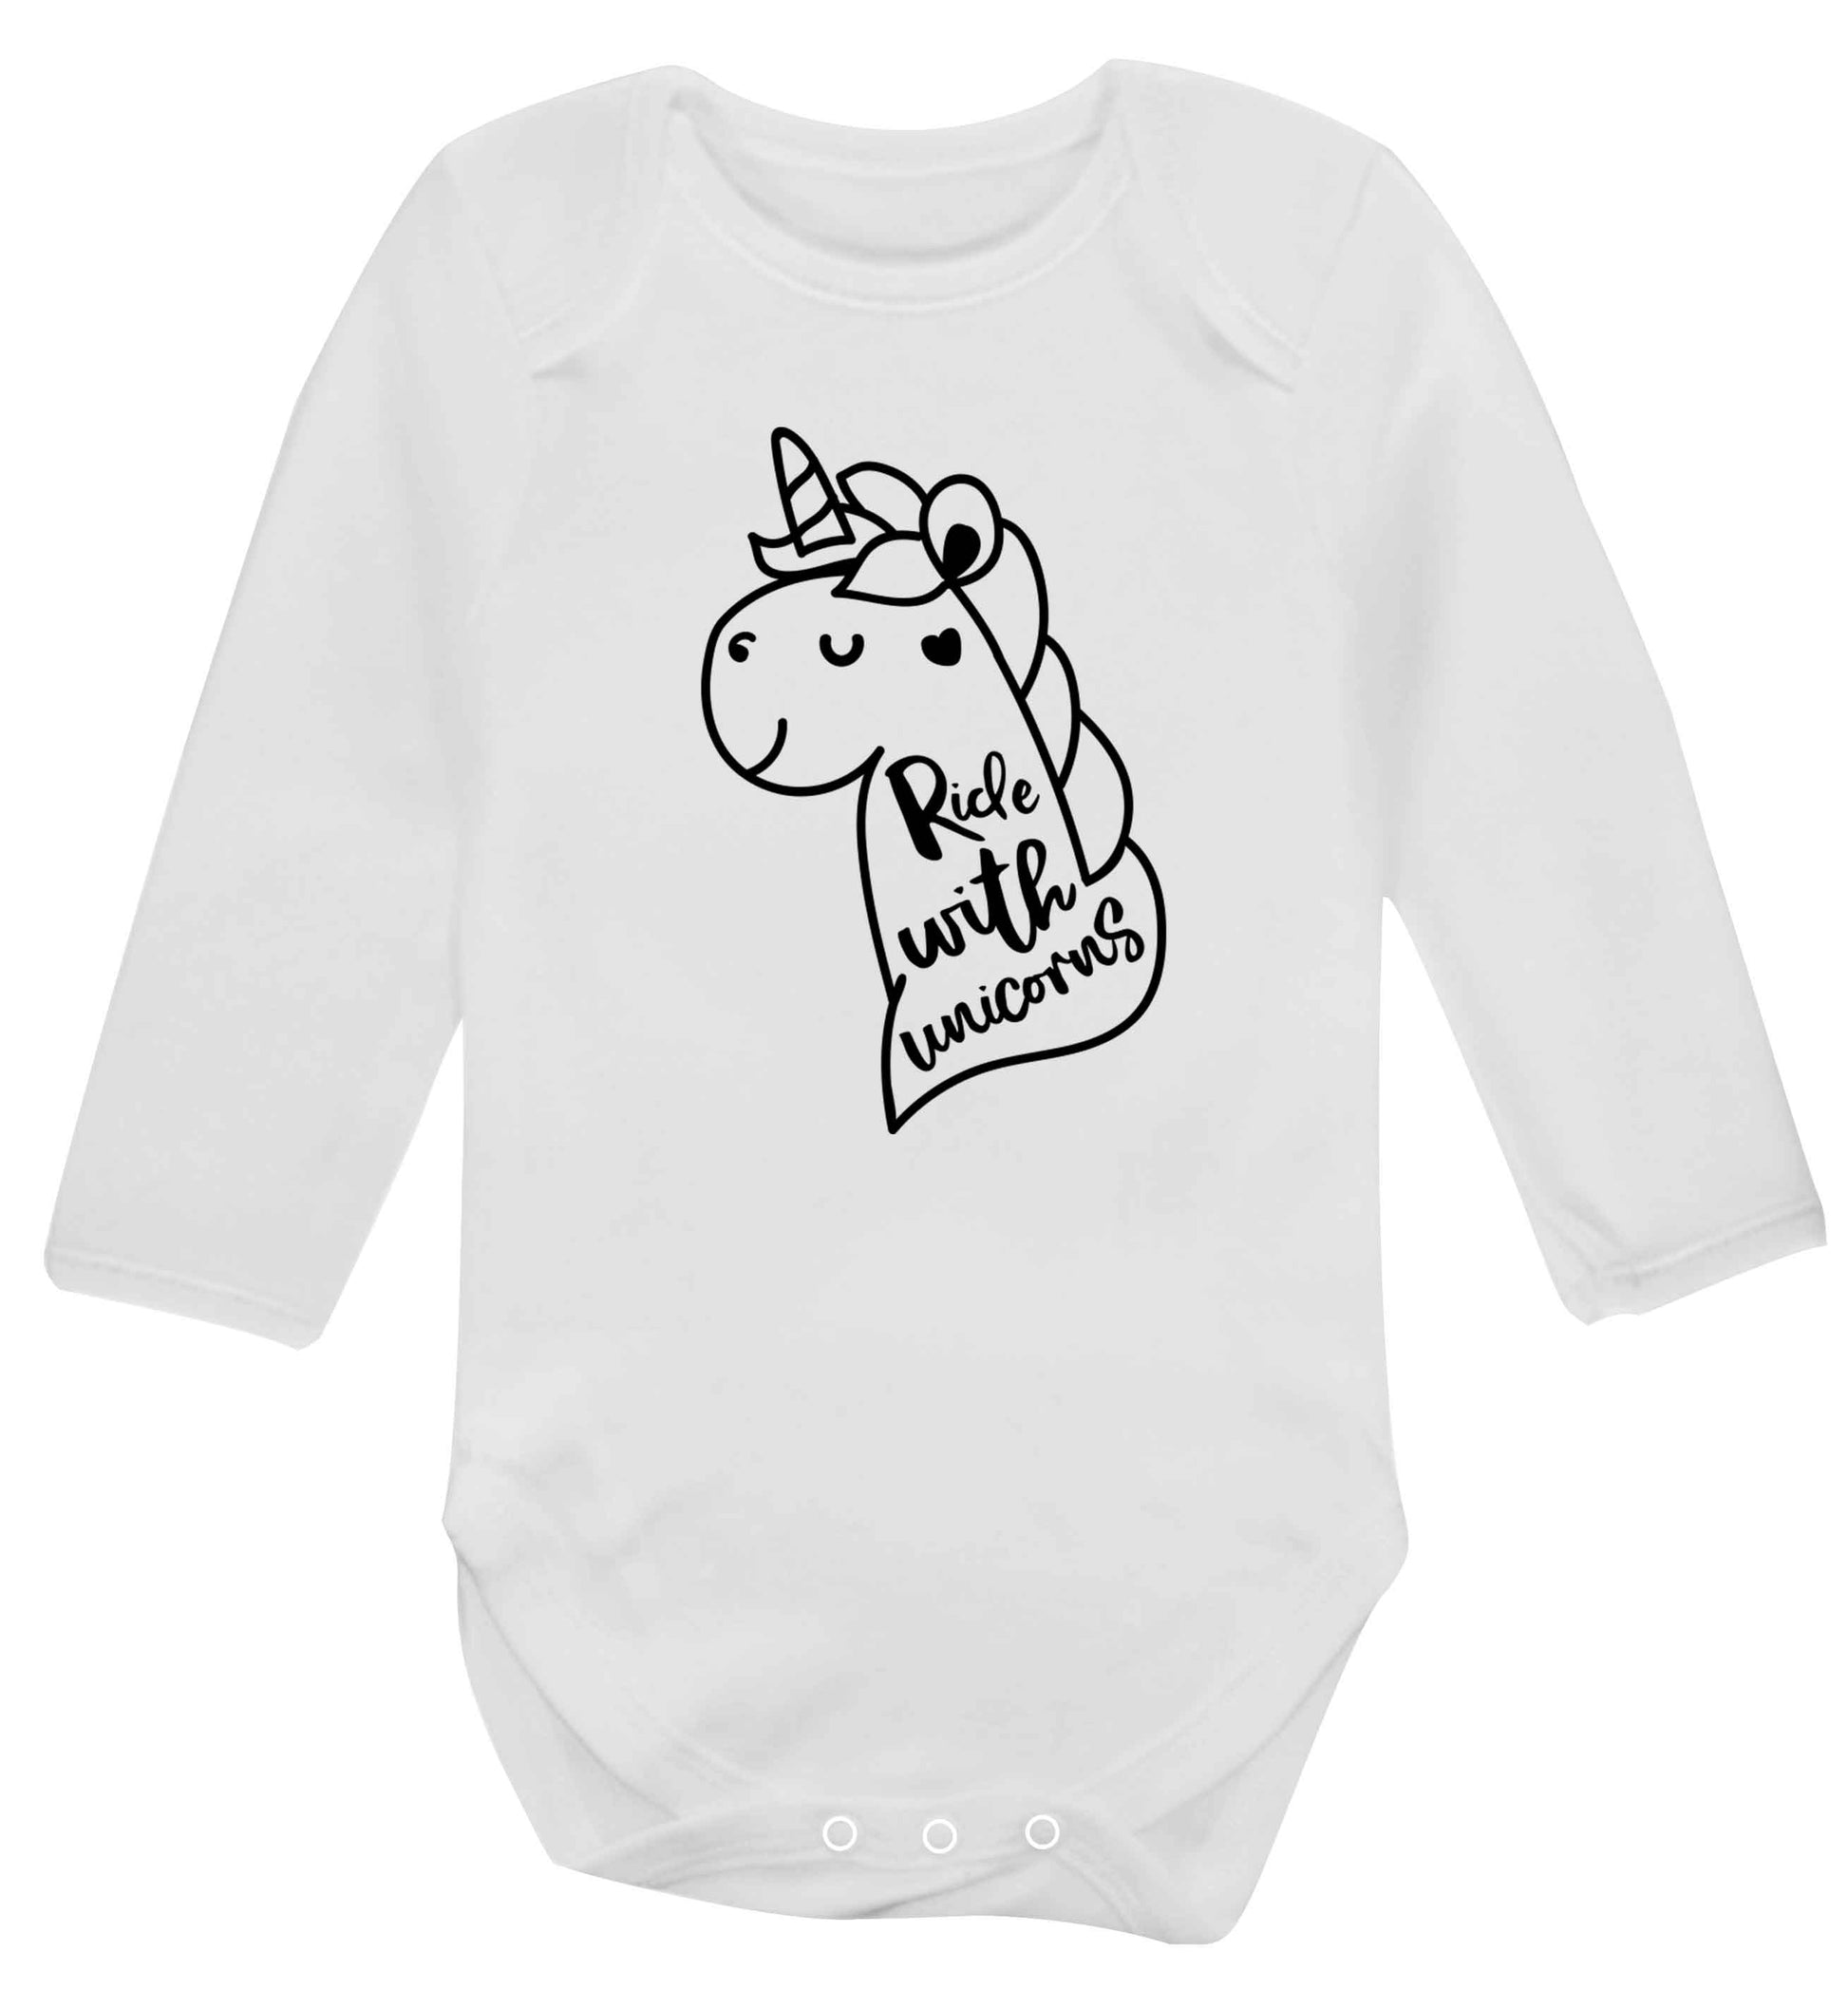 Ride with unicorns Baby Vest long sleeved white 6-12 months